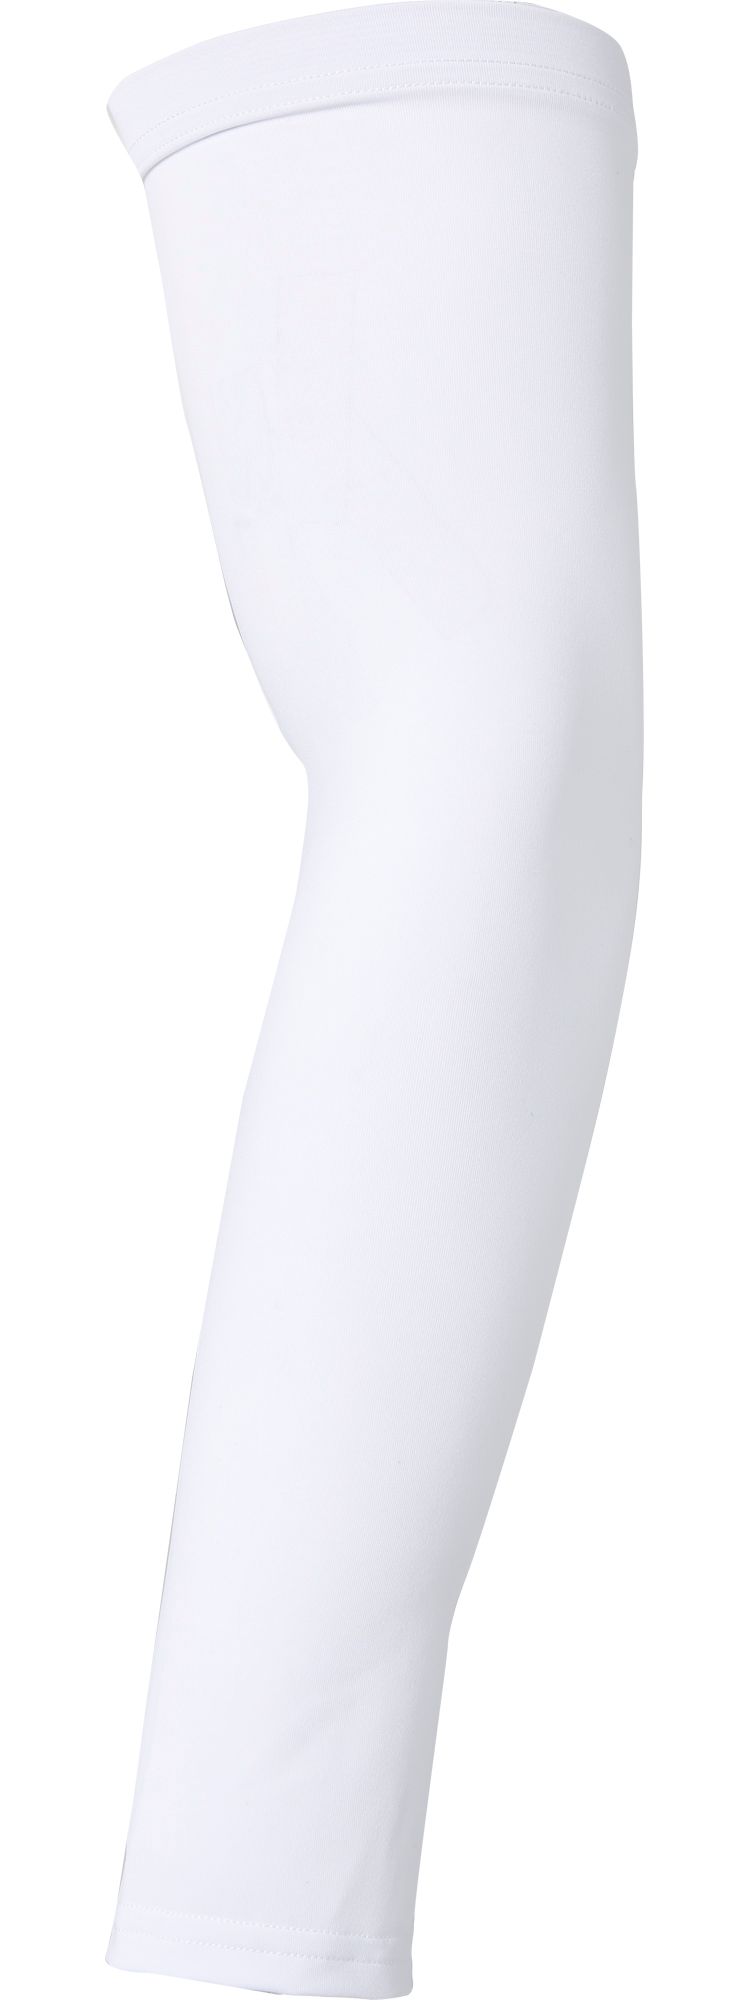 P-TEX Compression Arm Sleeve | DICK'S Sporting Goods